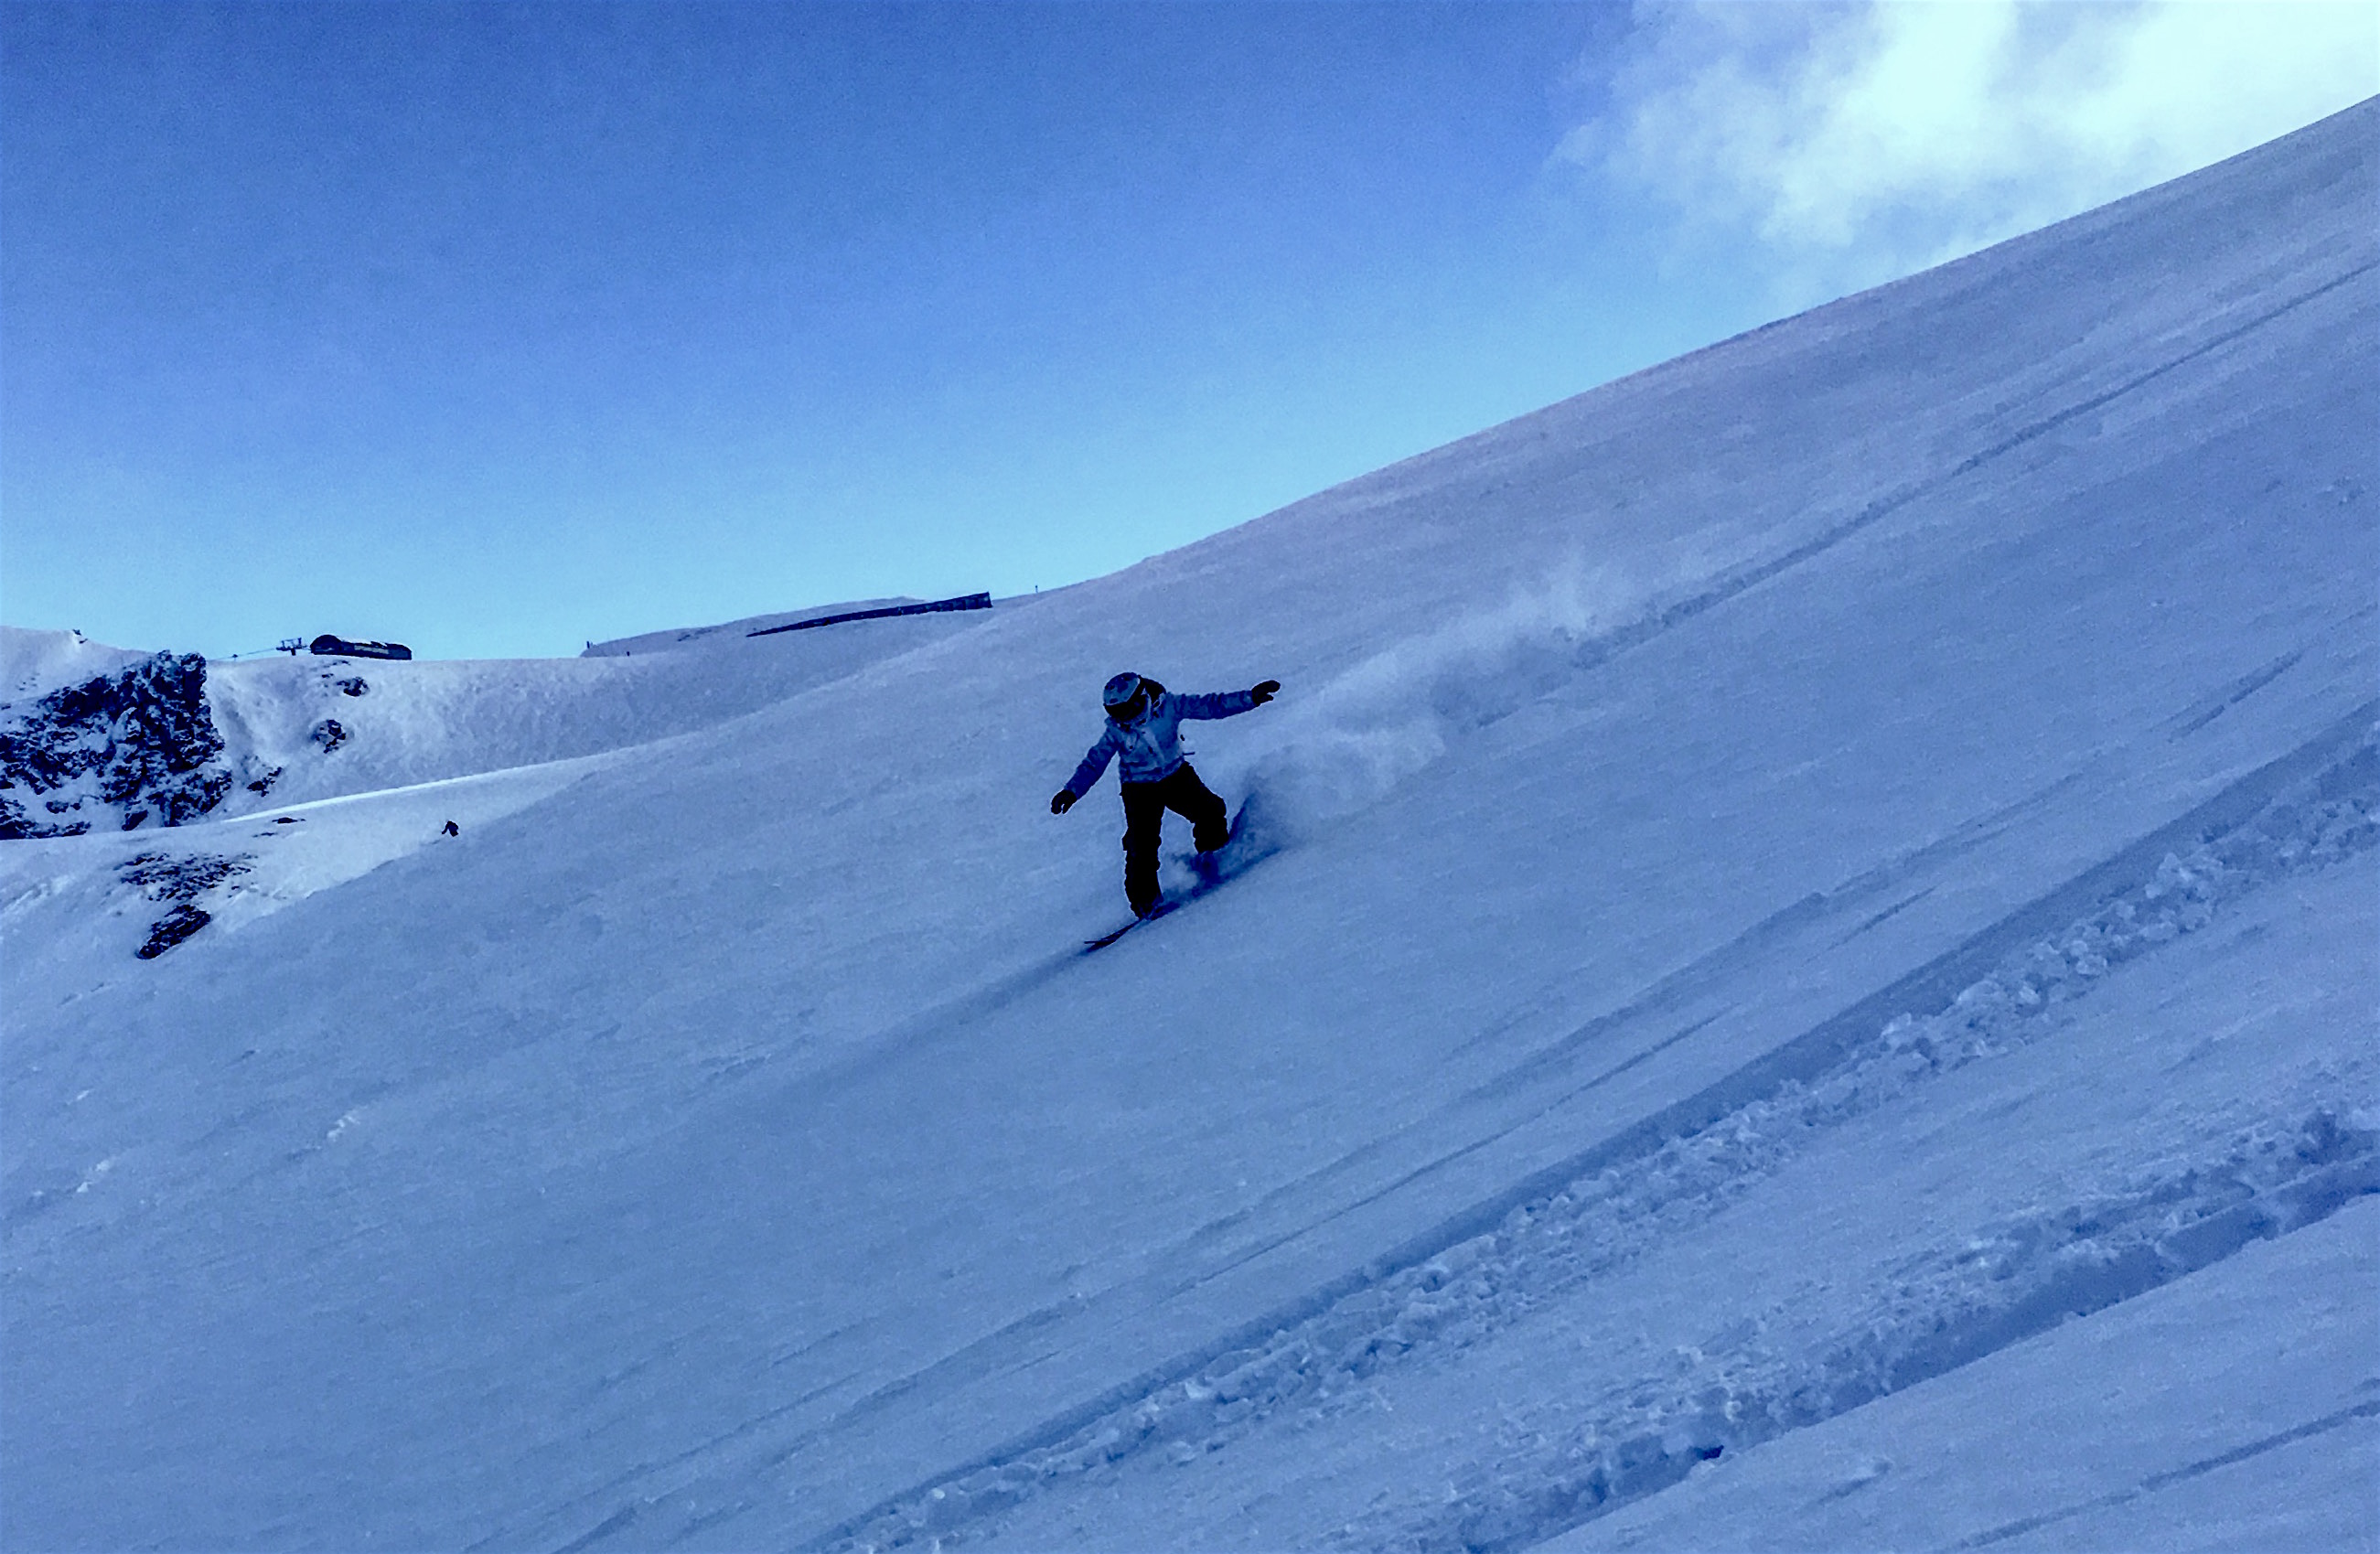 Cardrona on opening weekend. photo: yimmers